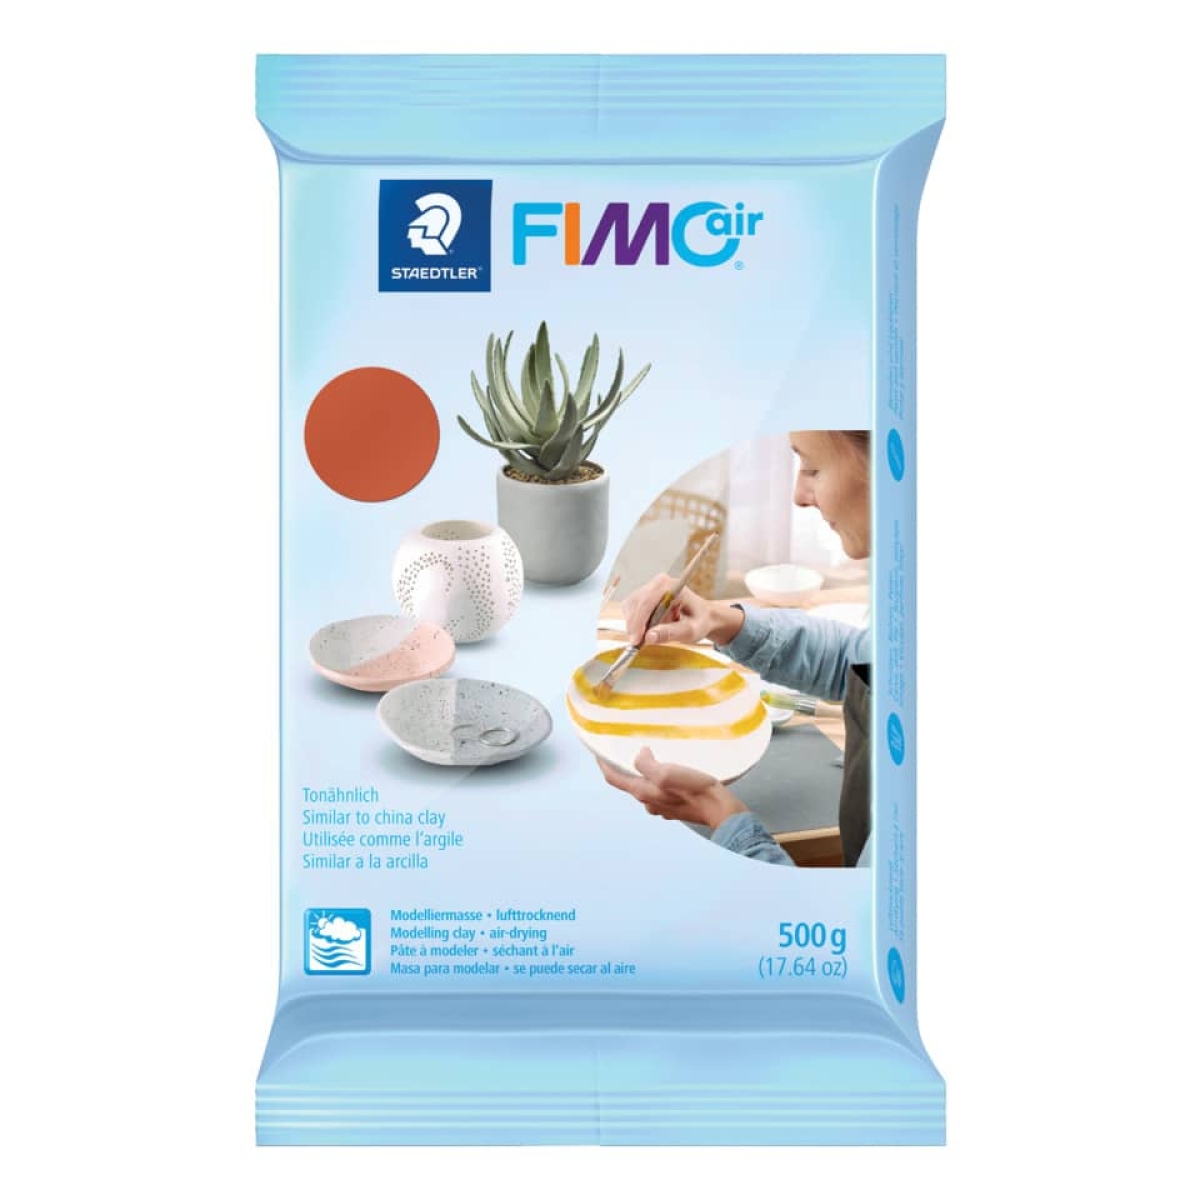 STAEDTLERModeling clay FIMO® air, 500 g, terracotta 8100-76-Price for 0.5000 kgArticle-No: 4006608806576